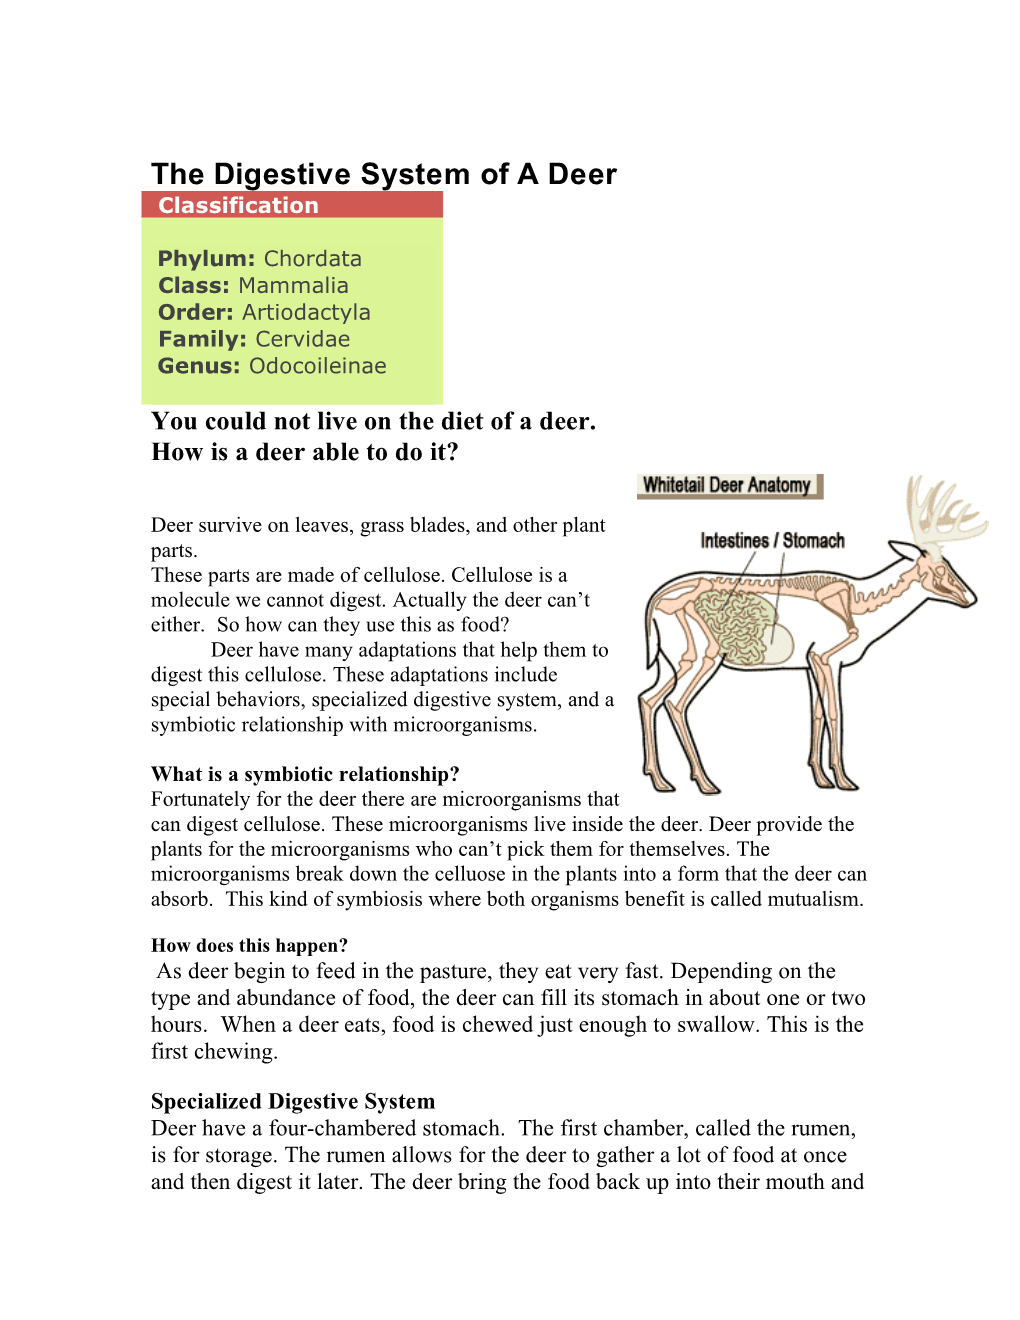 The Digestive System of a Deer Classification